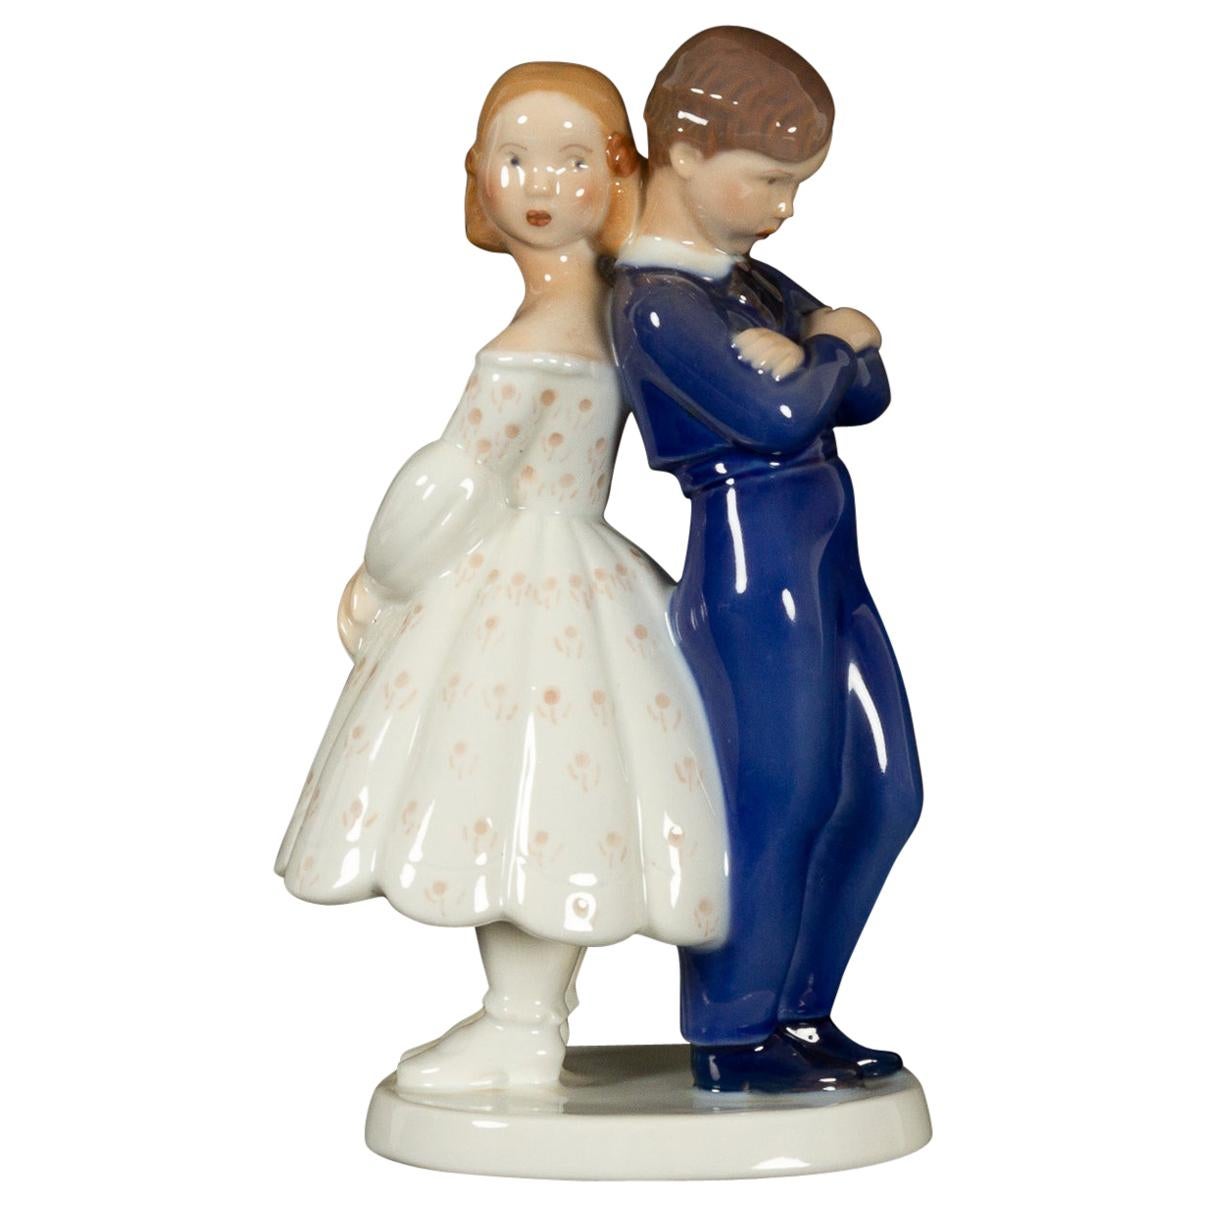 Vintage Danish Porcelain Figurine by Claire Weiss for Bing & Grøndahl, 1970s